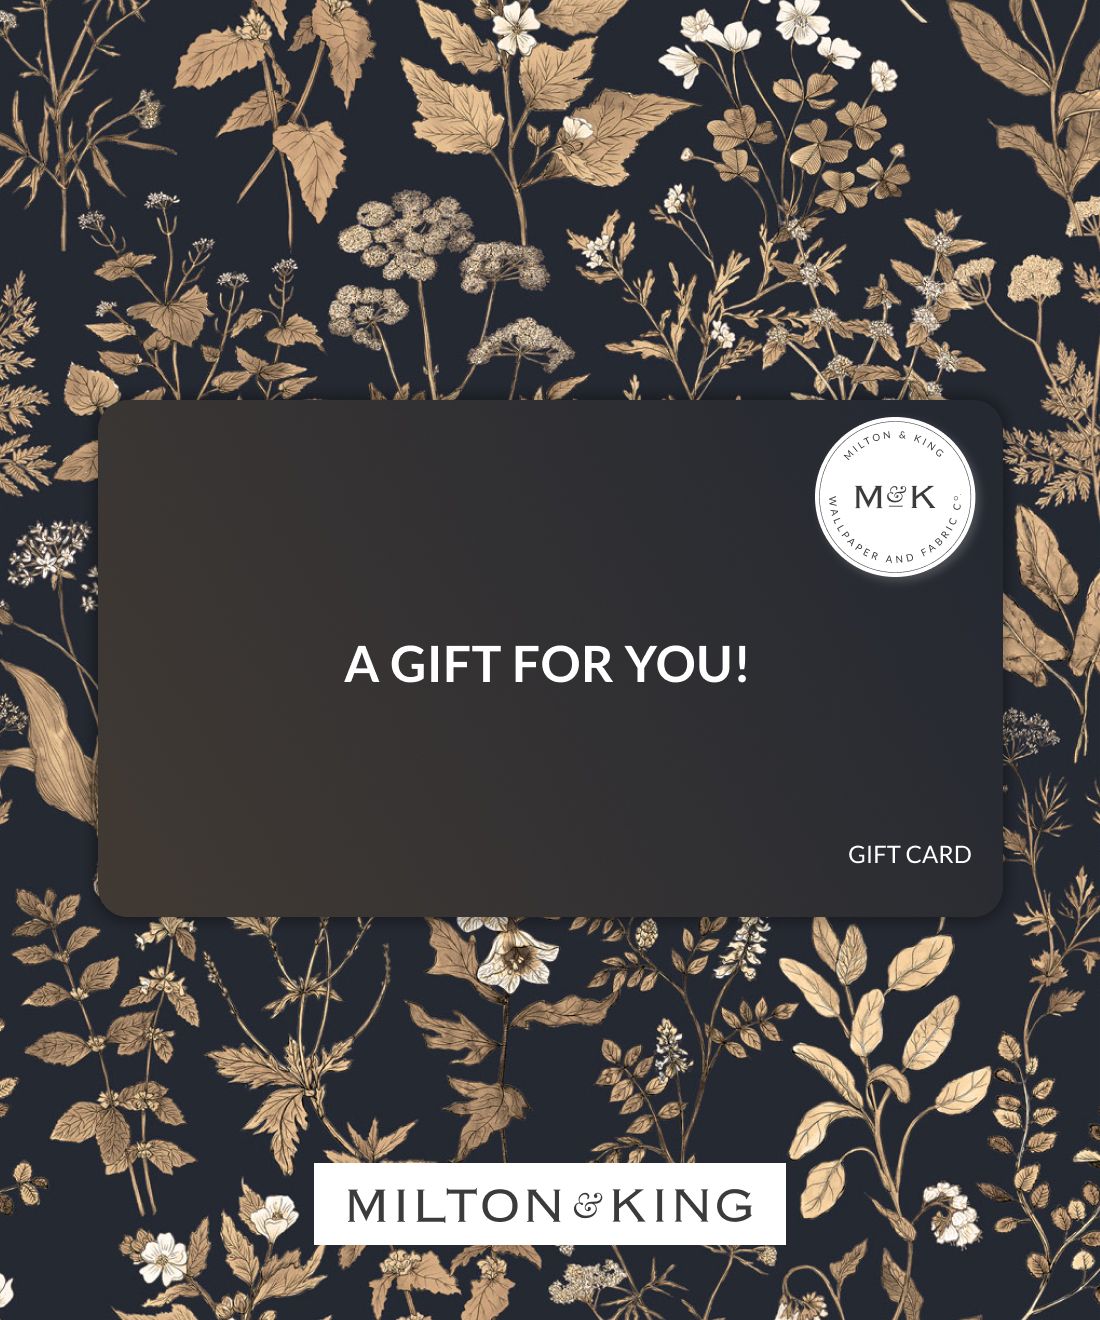 Gift Card - A gift for you!